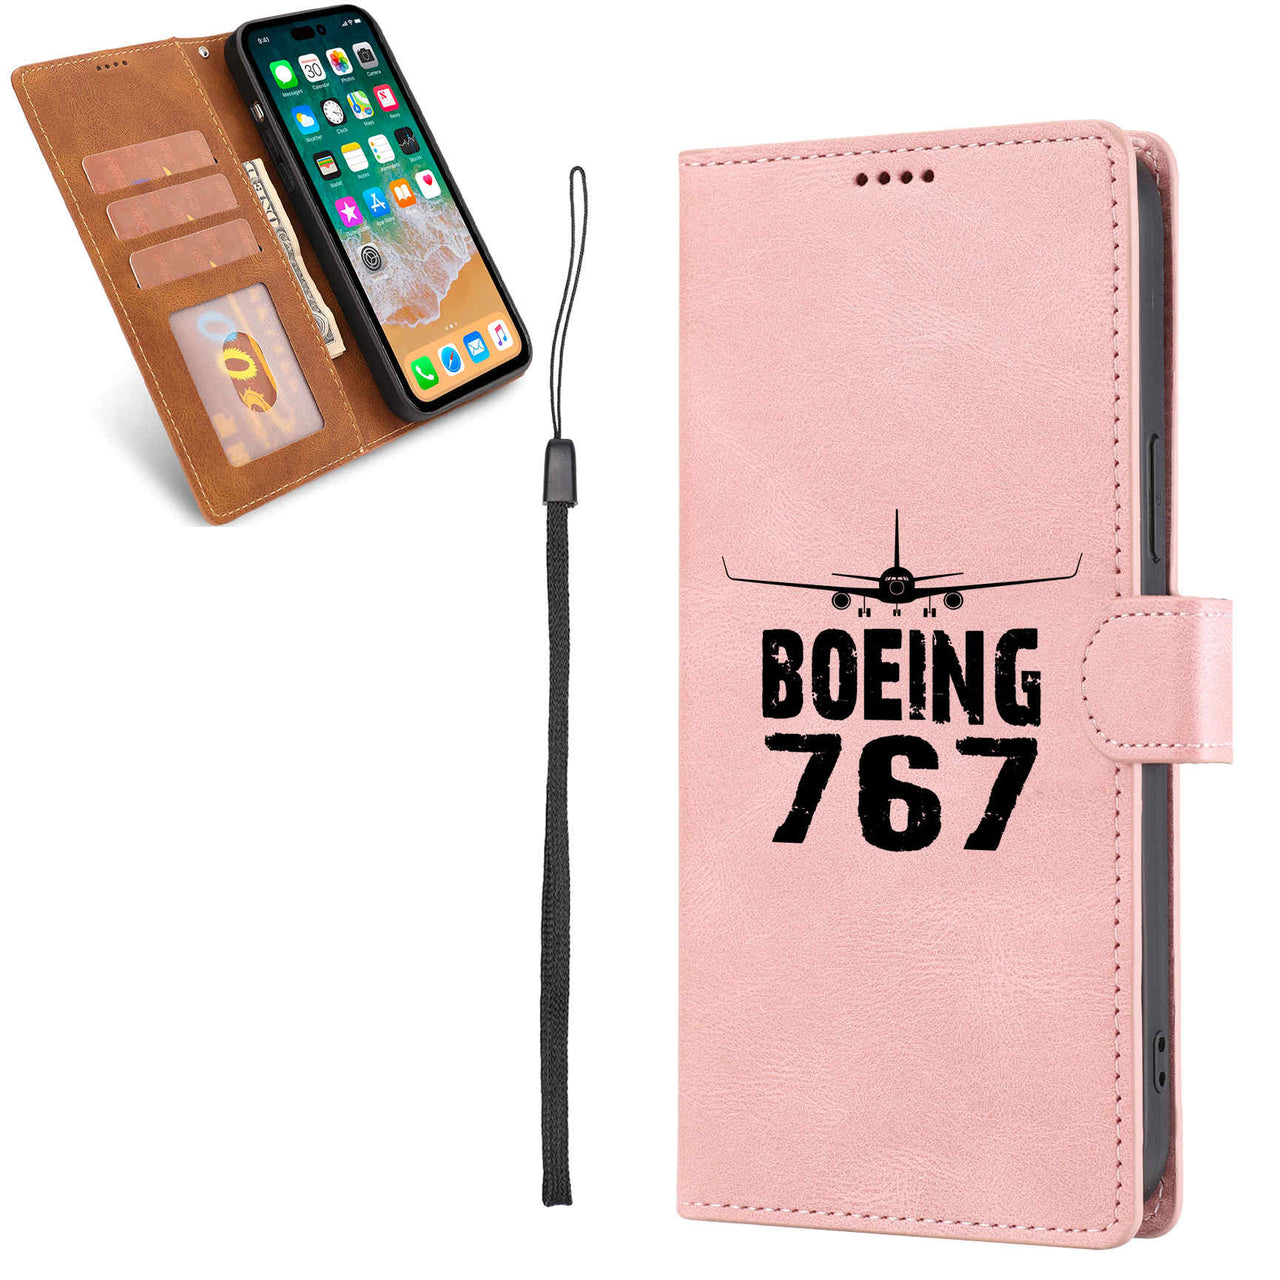 Boeing 767 & Plane Designed Leather Samsung S & Note Cases